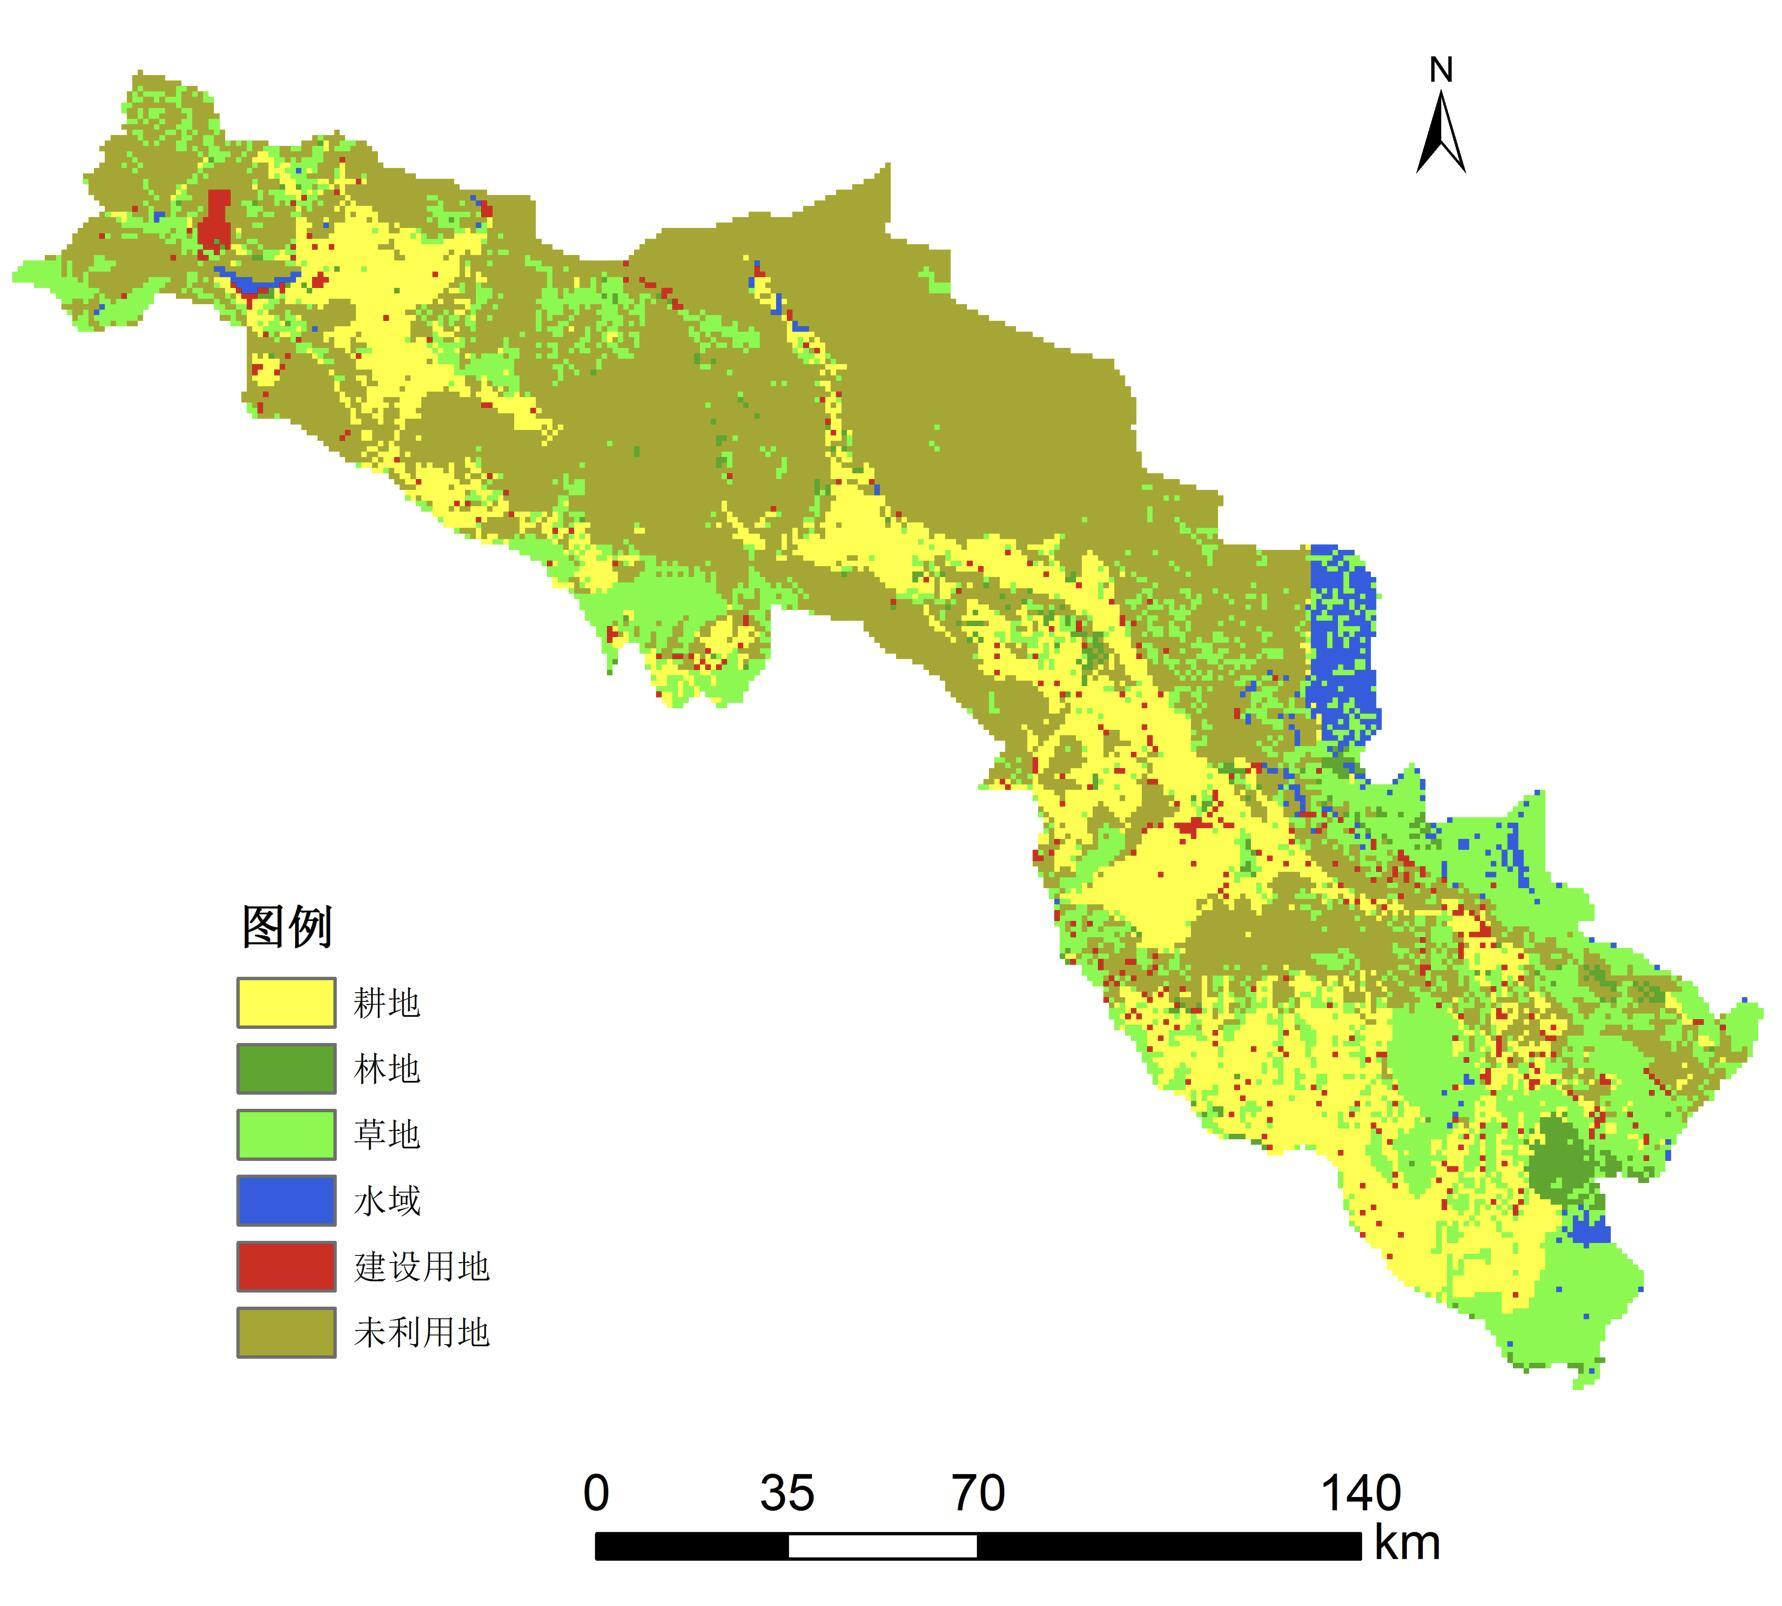 Simulations of land use and cover change in the future (2015-2030)